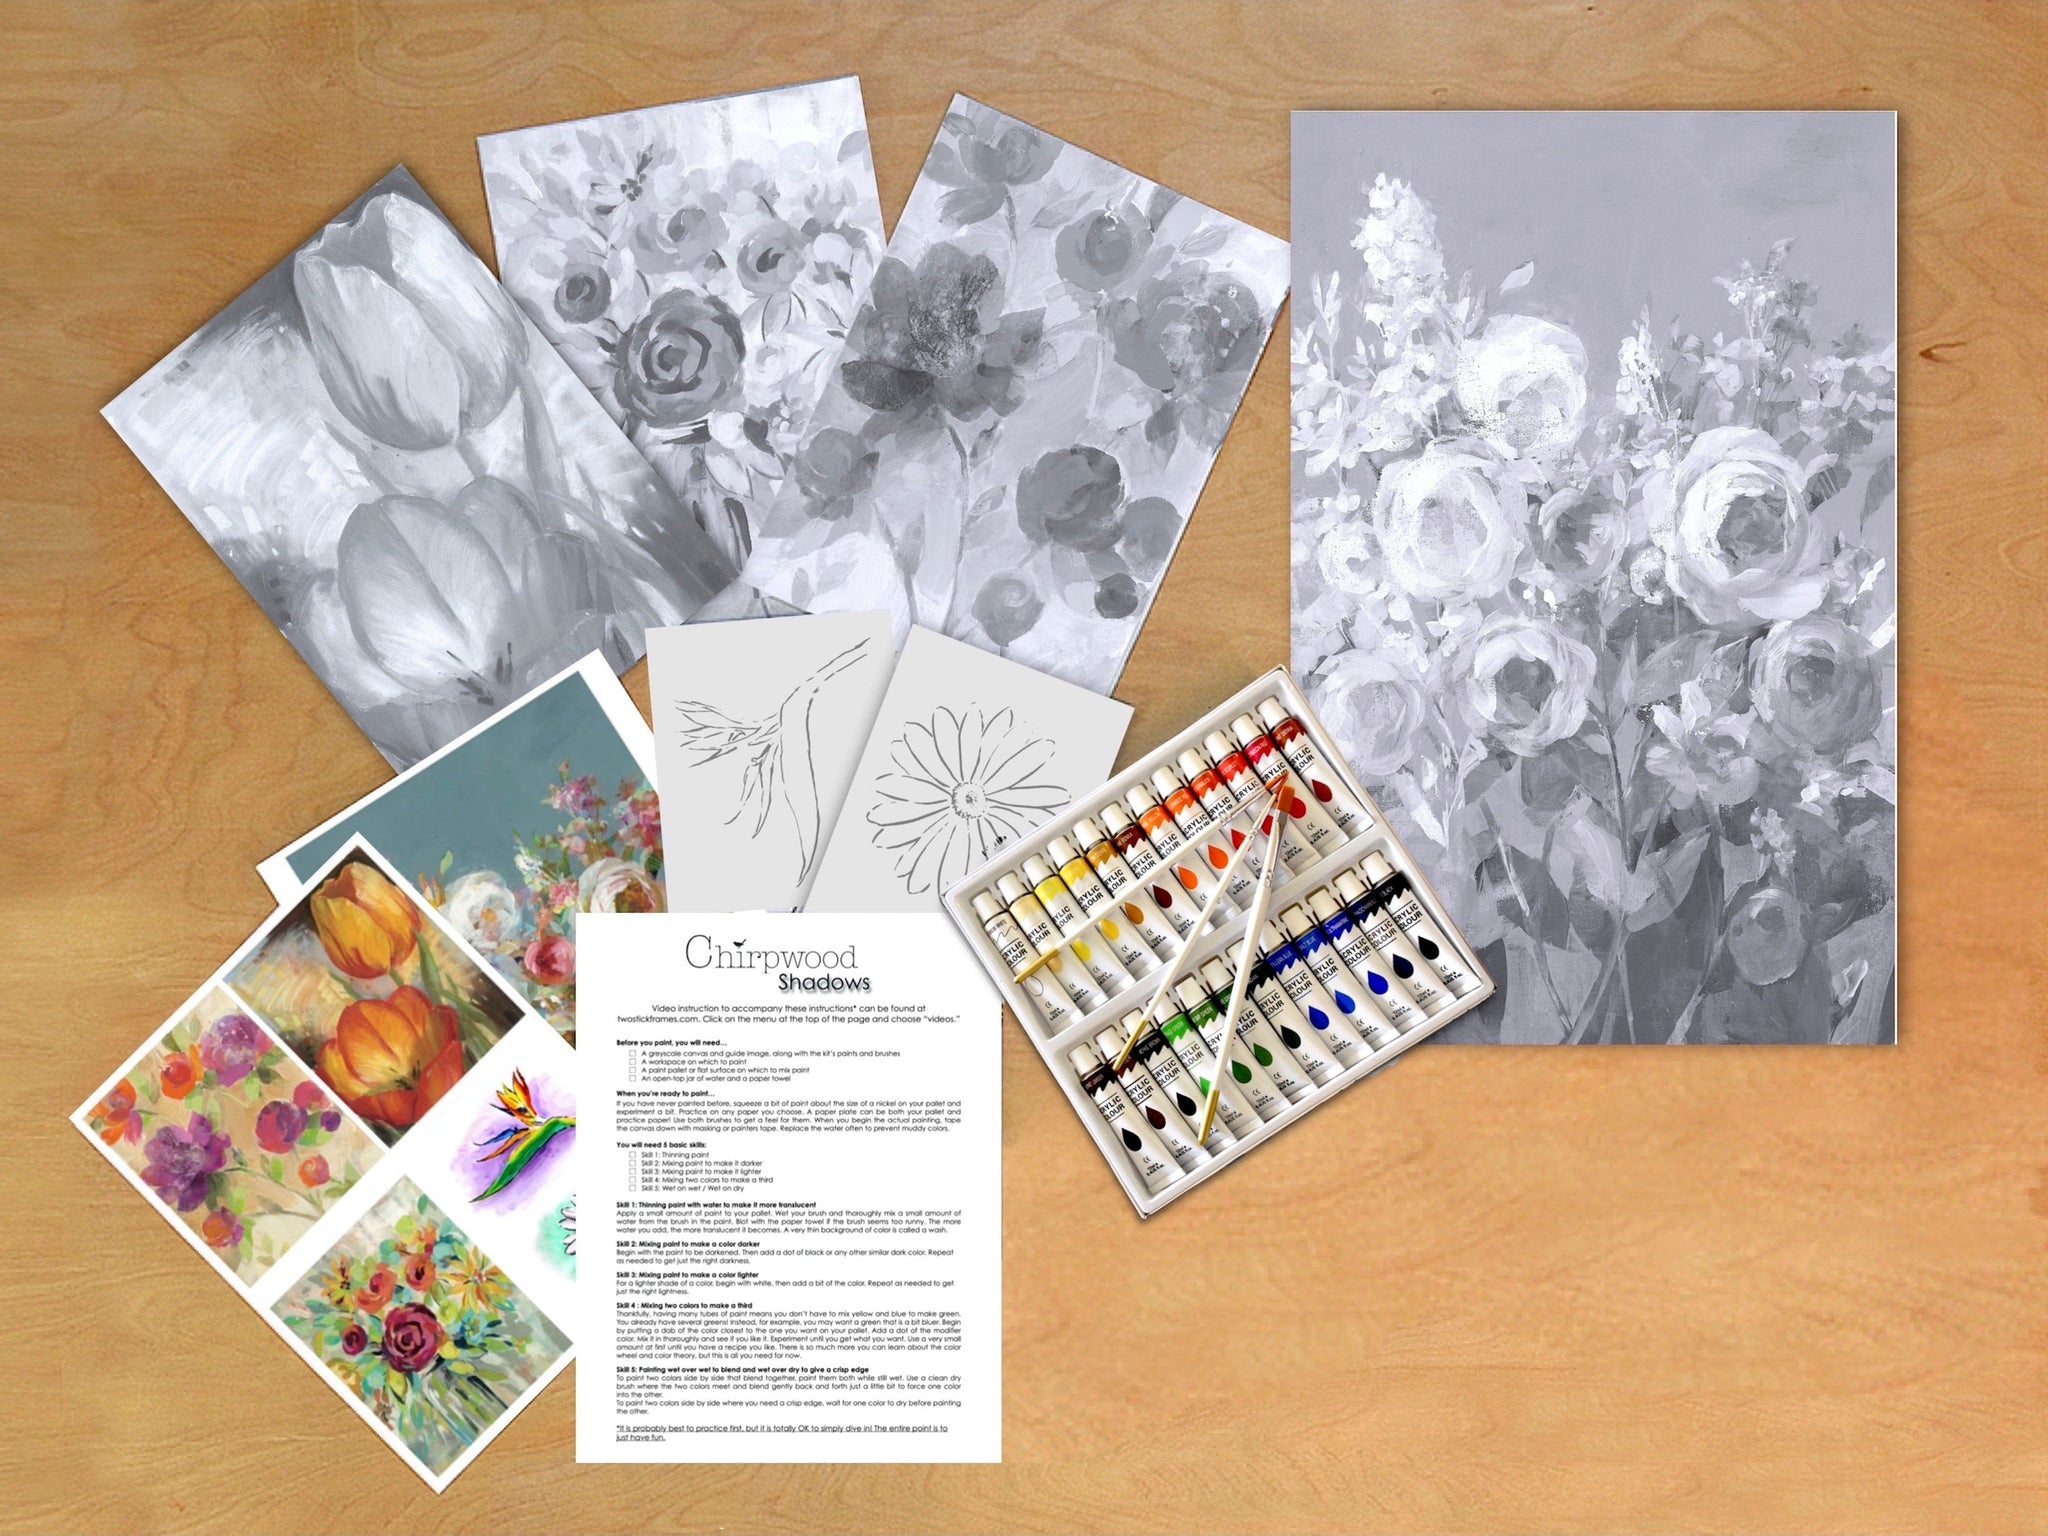 Canvas Painting Kit with Step-by-Step Guide